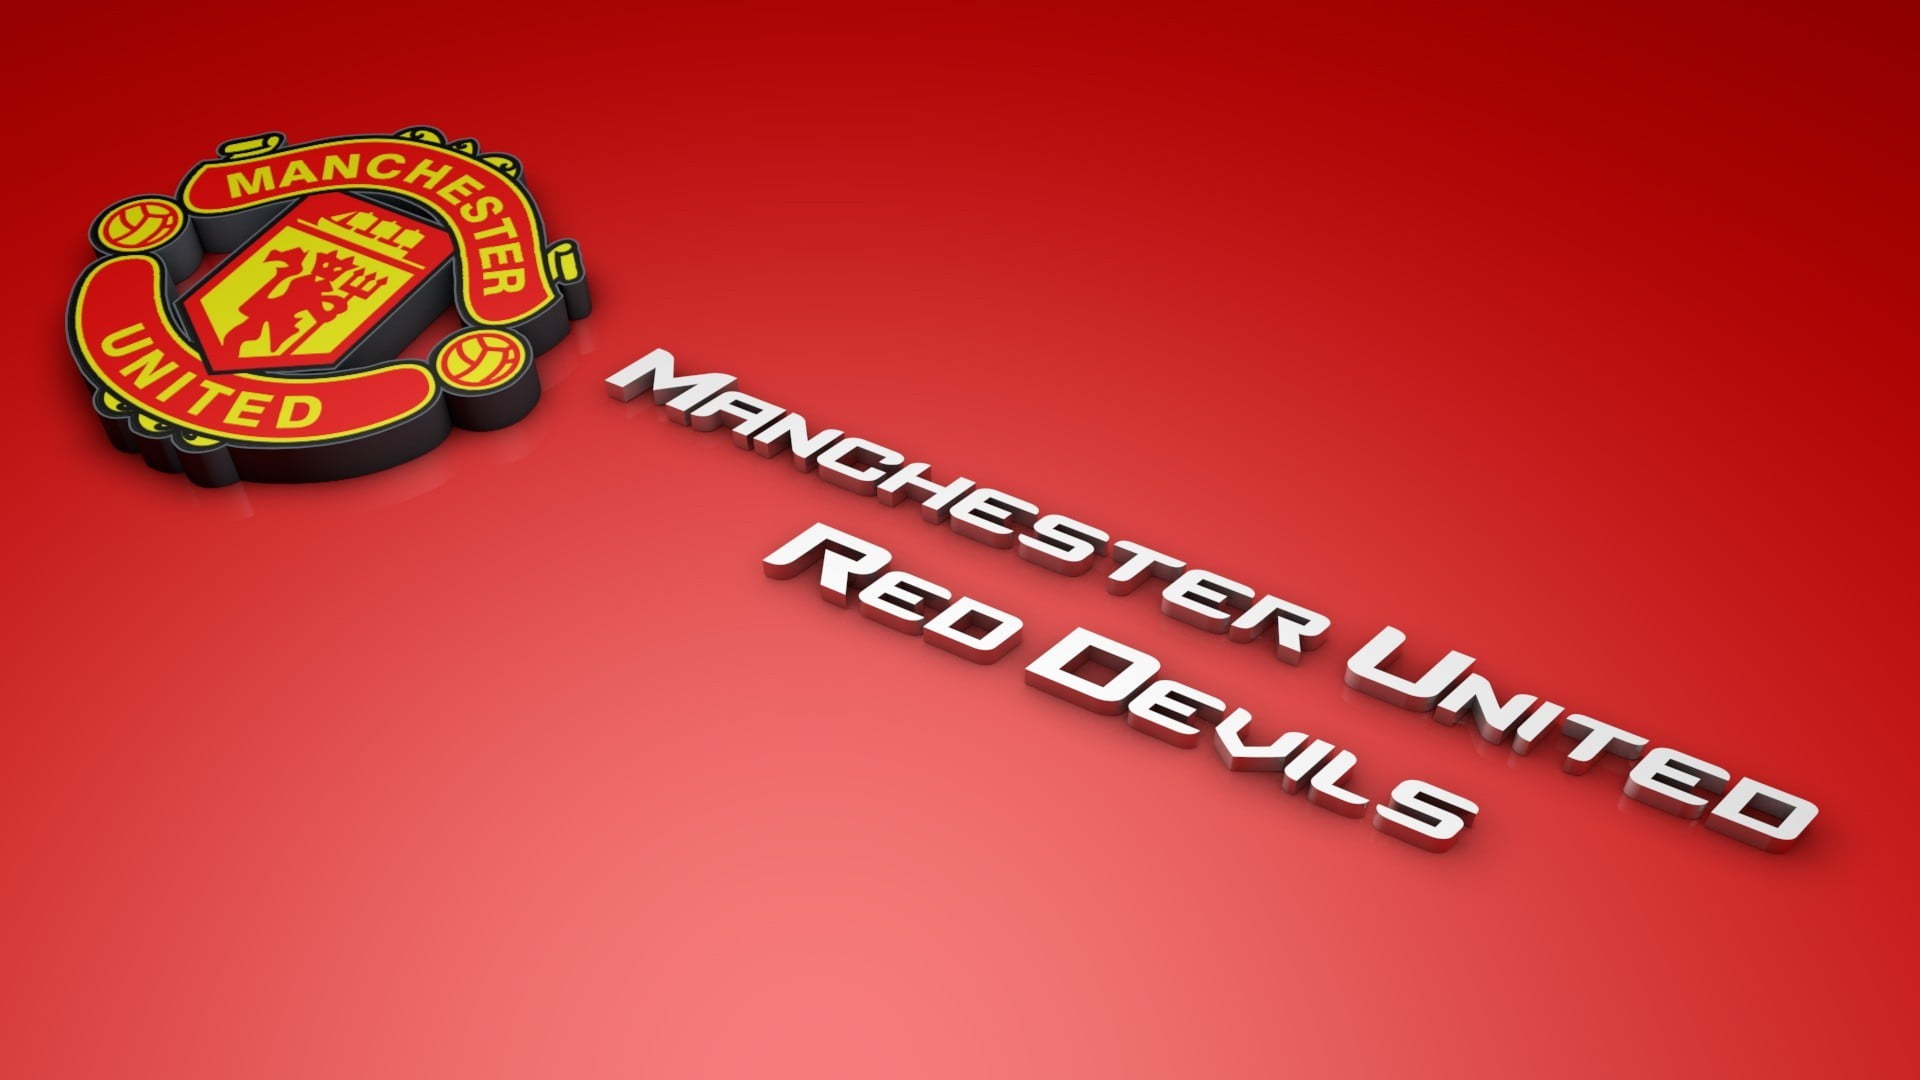 Manchester United Red Devils, Manchester United HD | Wallpaper Flare